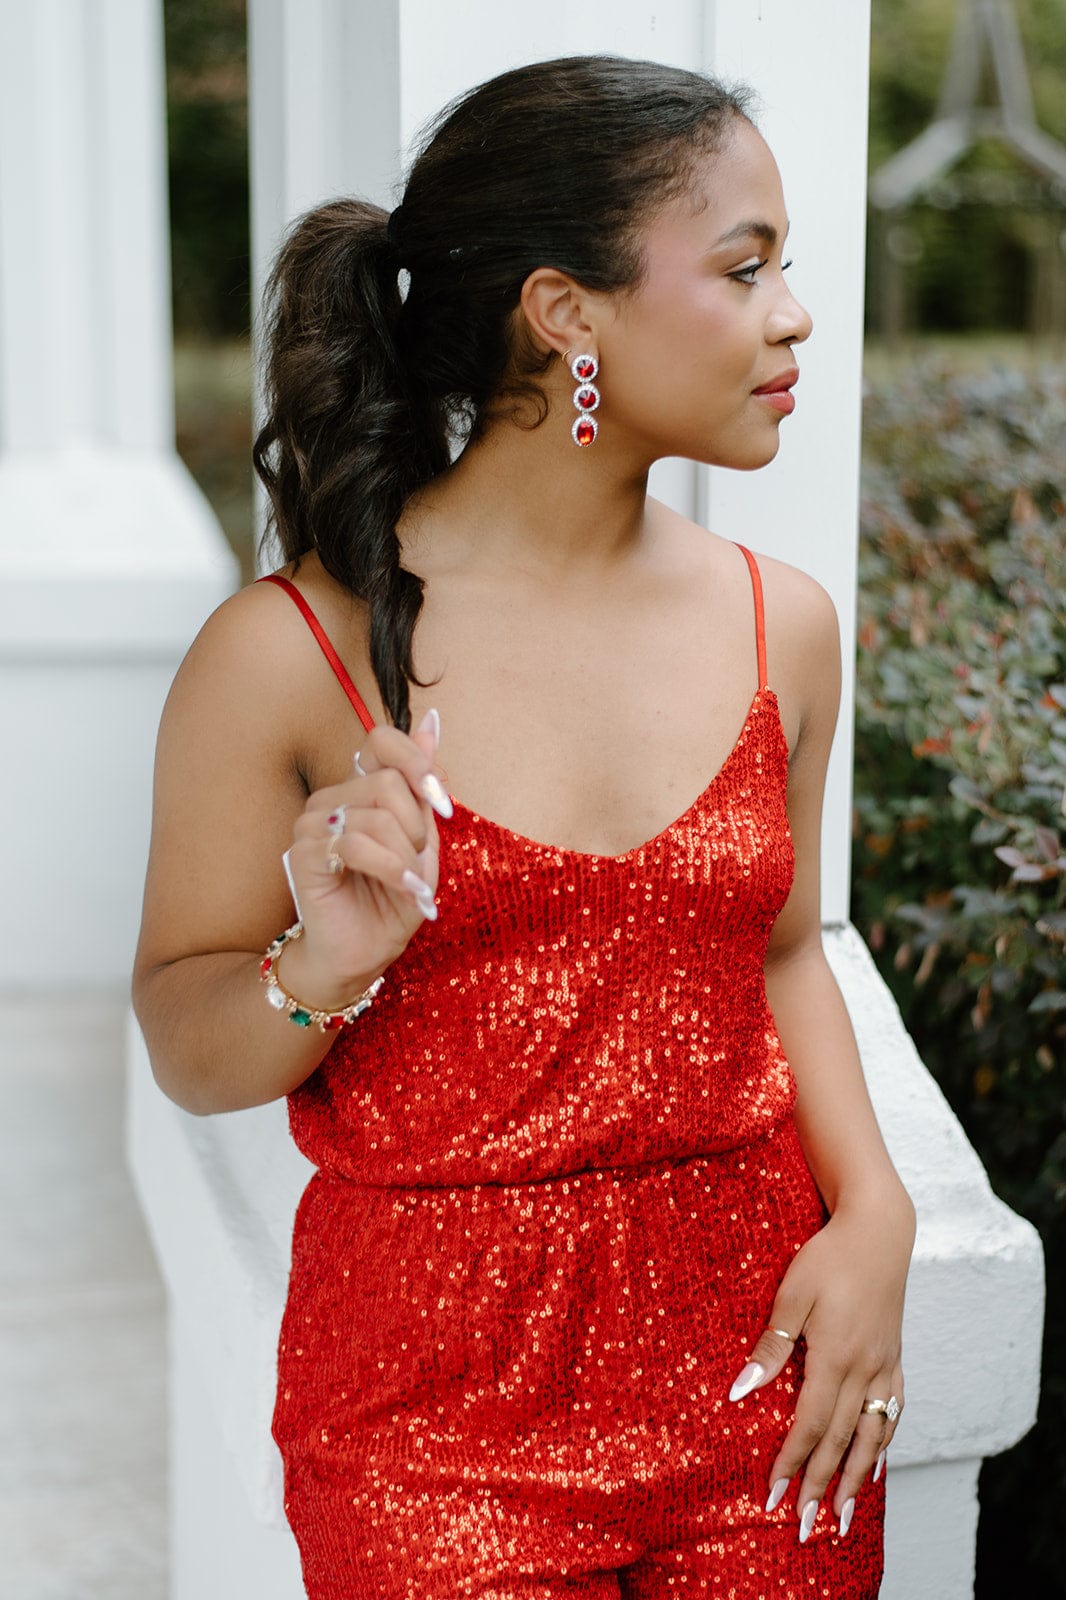 Red Sequin Spaghetti Jumpsuit